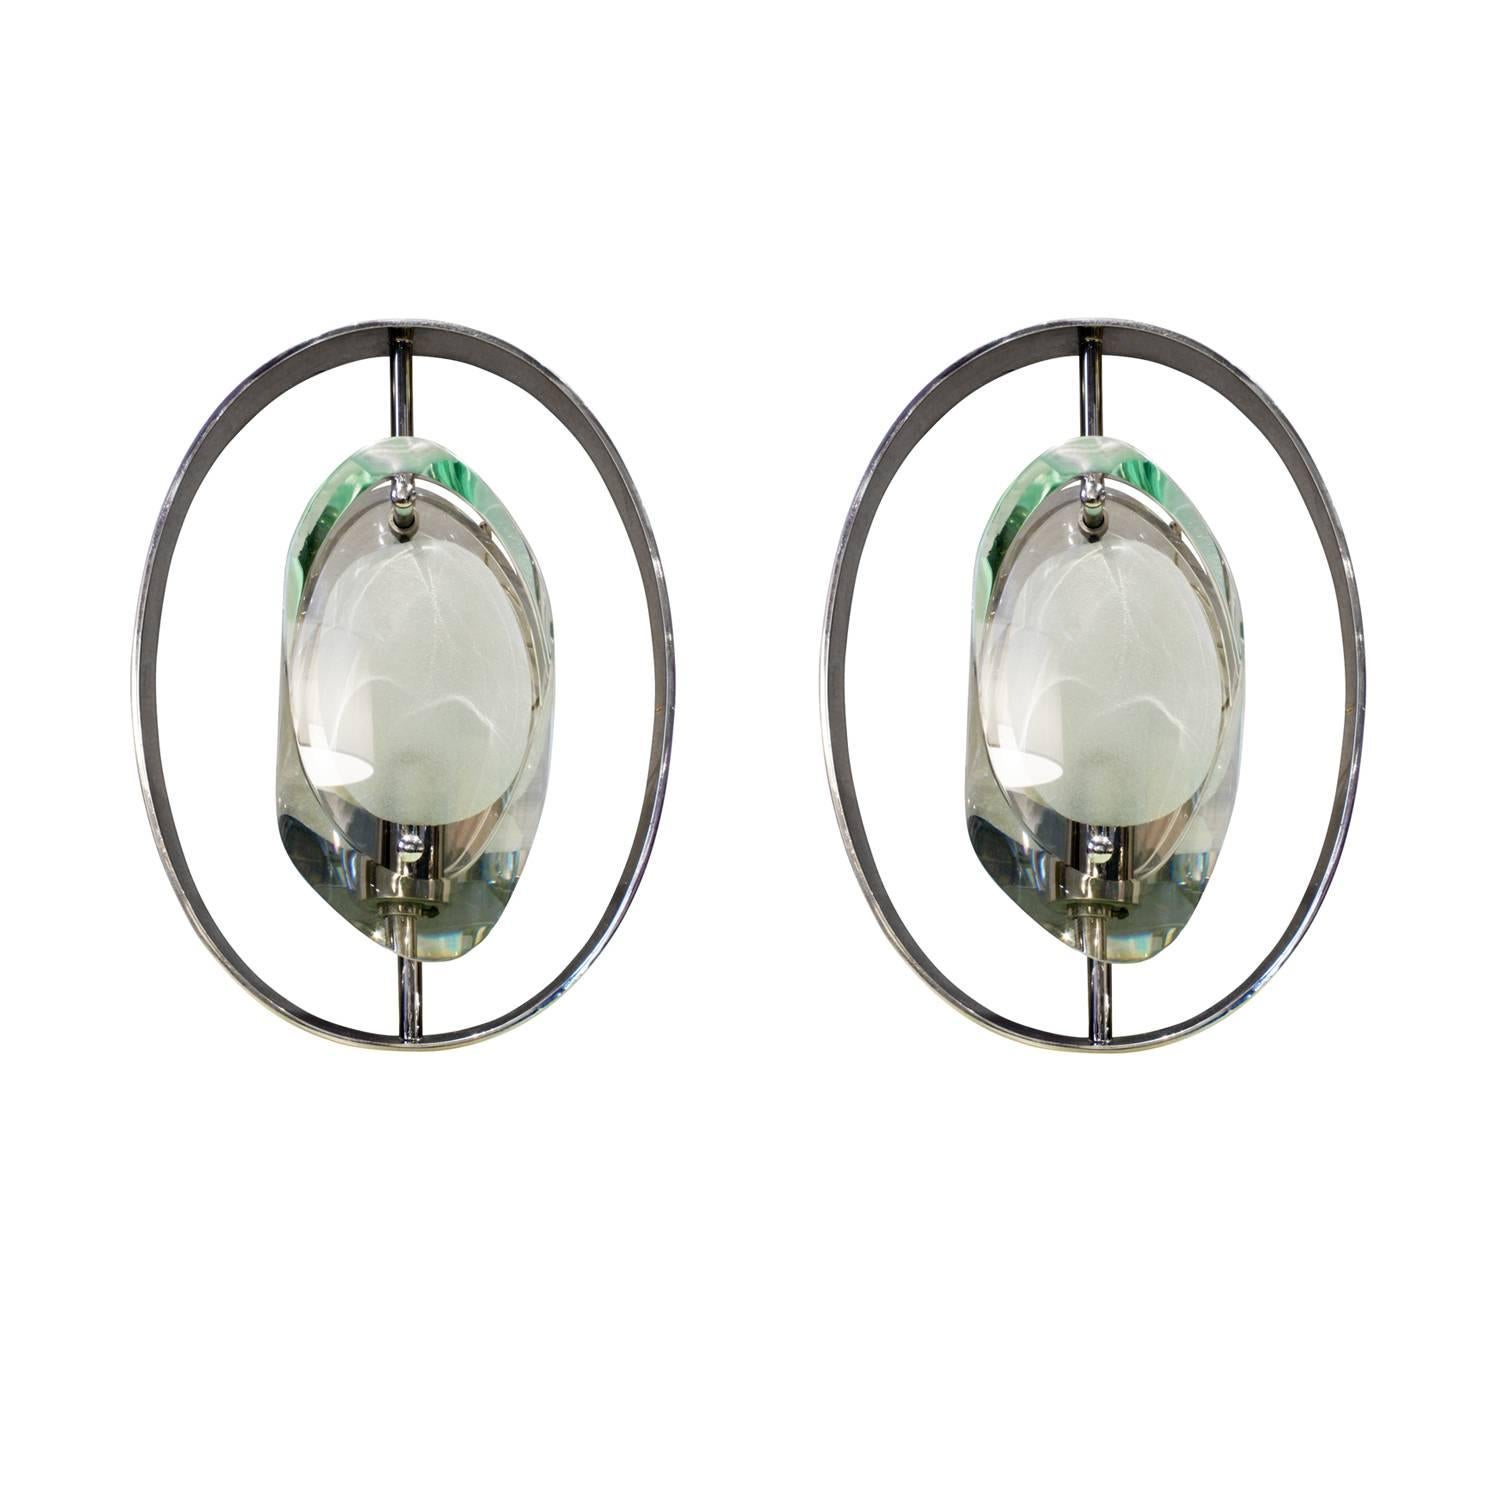 Pair of sconces in hand-cut and polished glass with nickel mounts in the style of Max Ingrand for Fontana Arte, 1990s